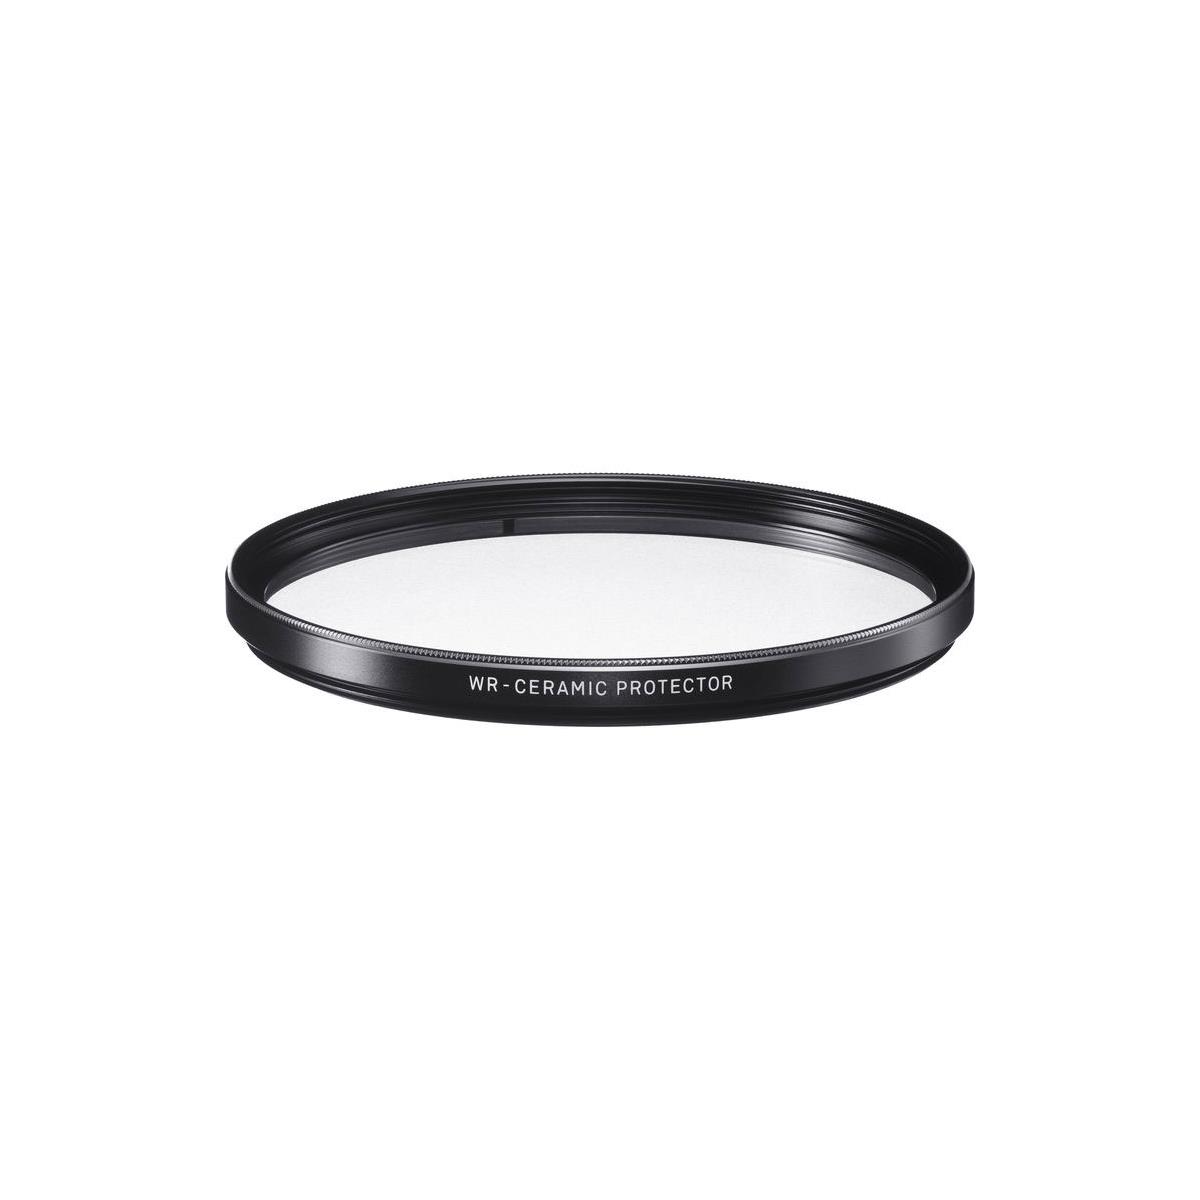 Sigma 77mm WR Ceramic Protector Ultra Thin Clear Glass Lens Filter camera filter accessories 77mm 8 sides glass kaleidoscope prism